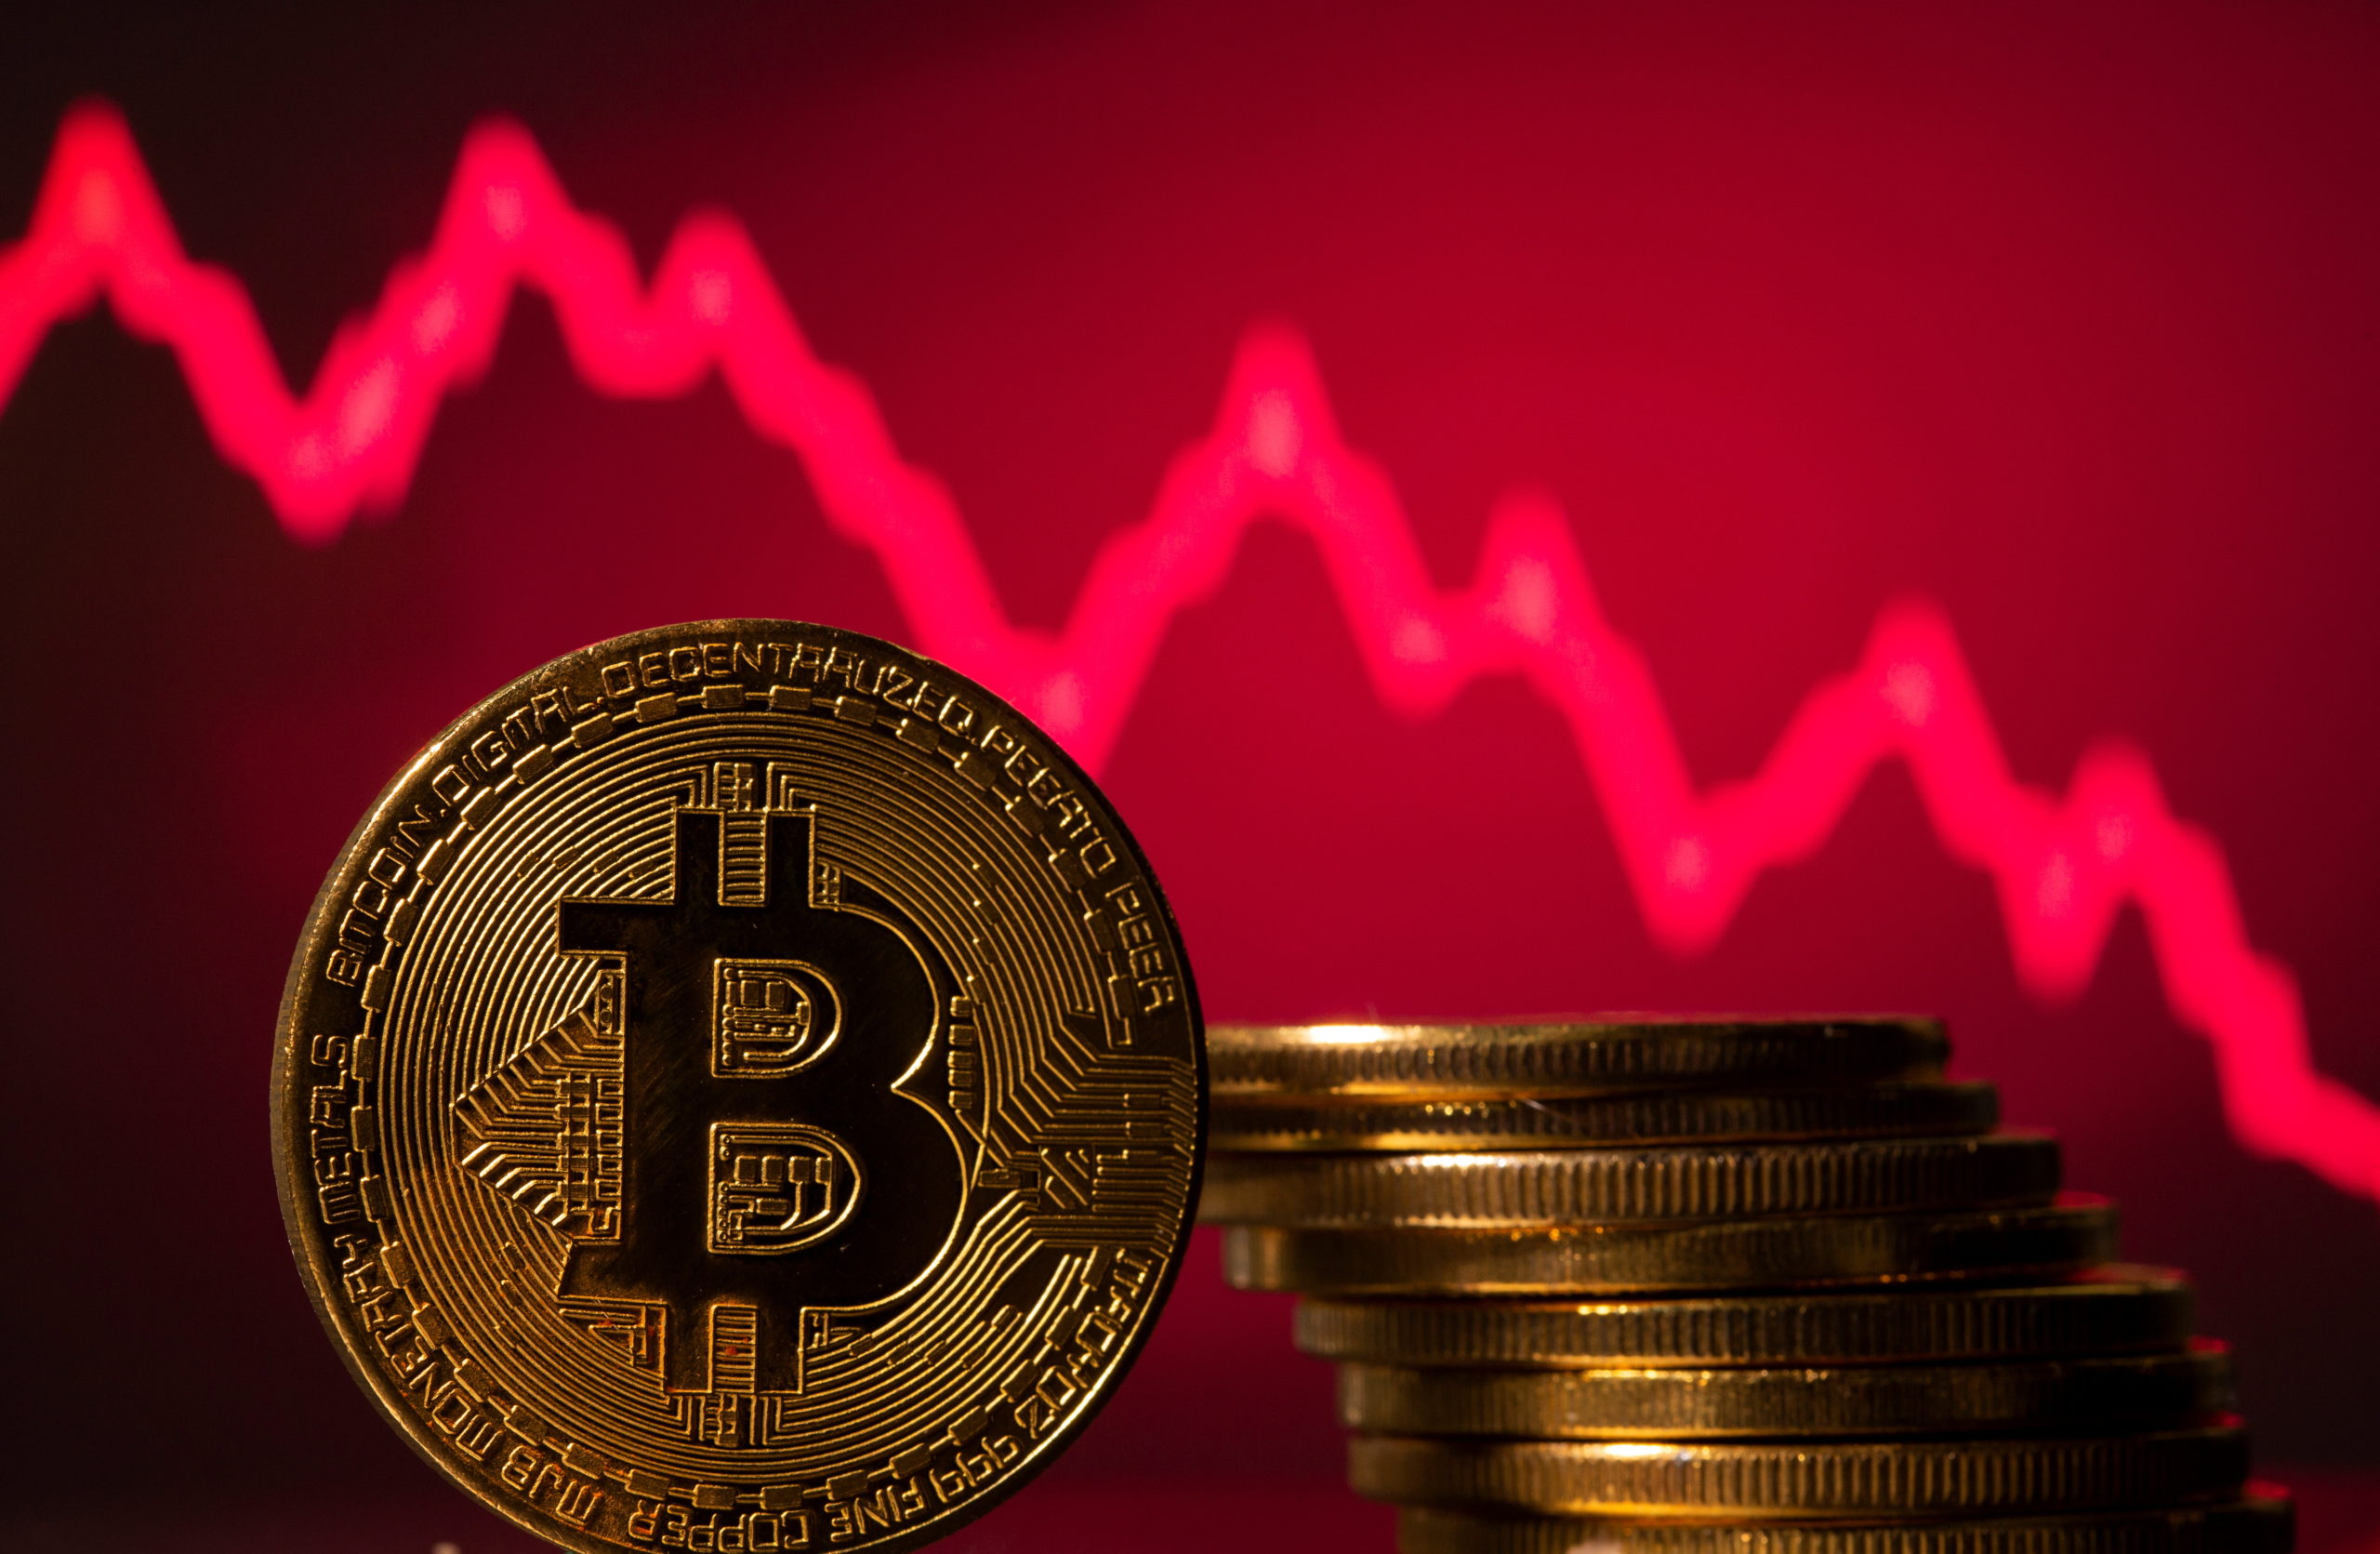 A representations of virtual currency Bitcoin is seen in front of a stock graph in this illustration